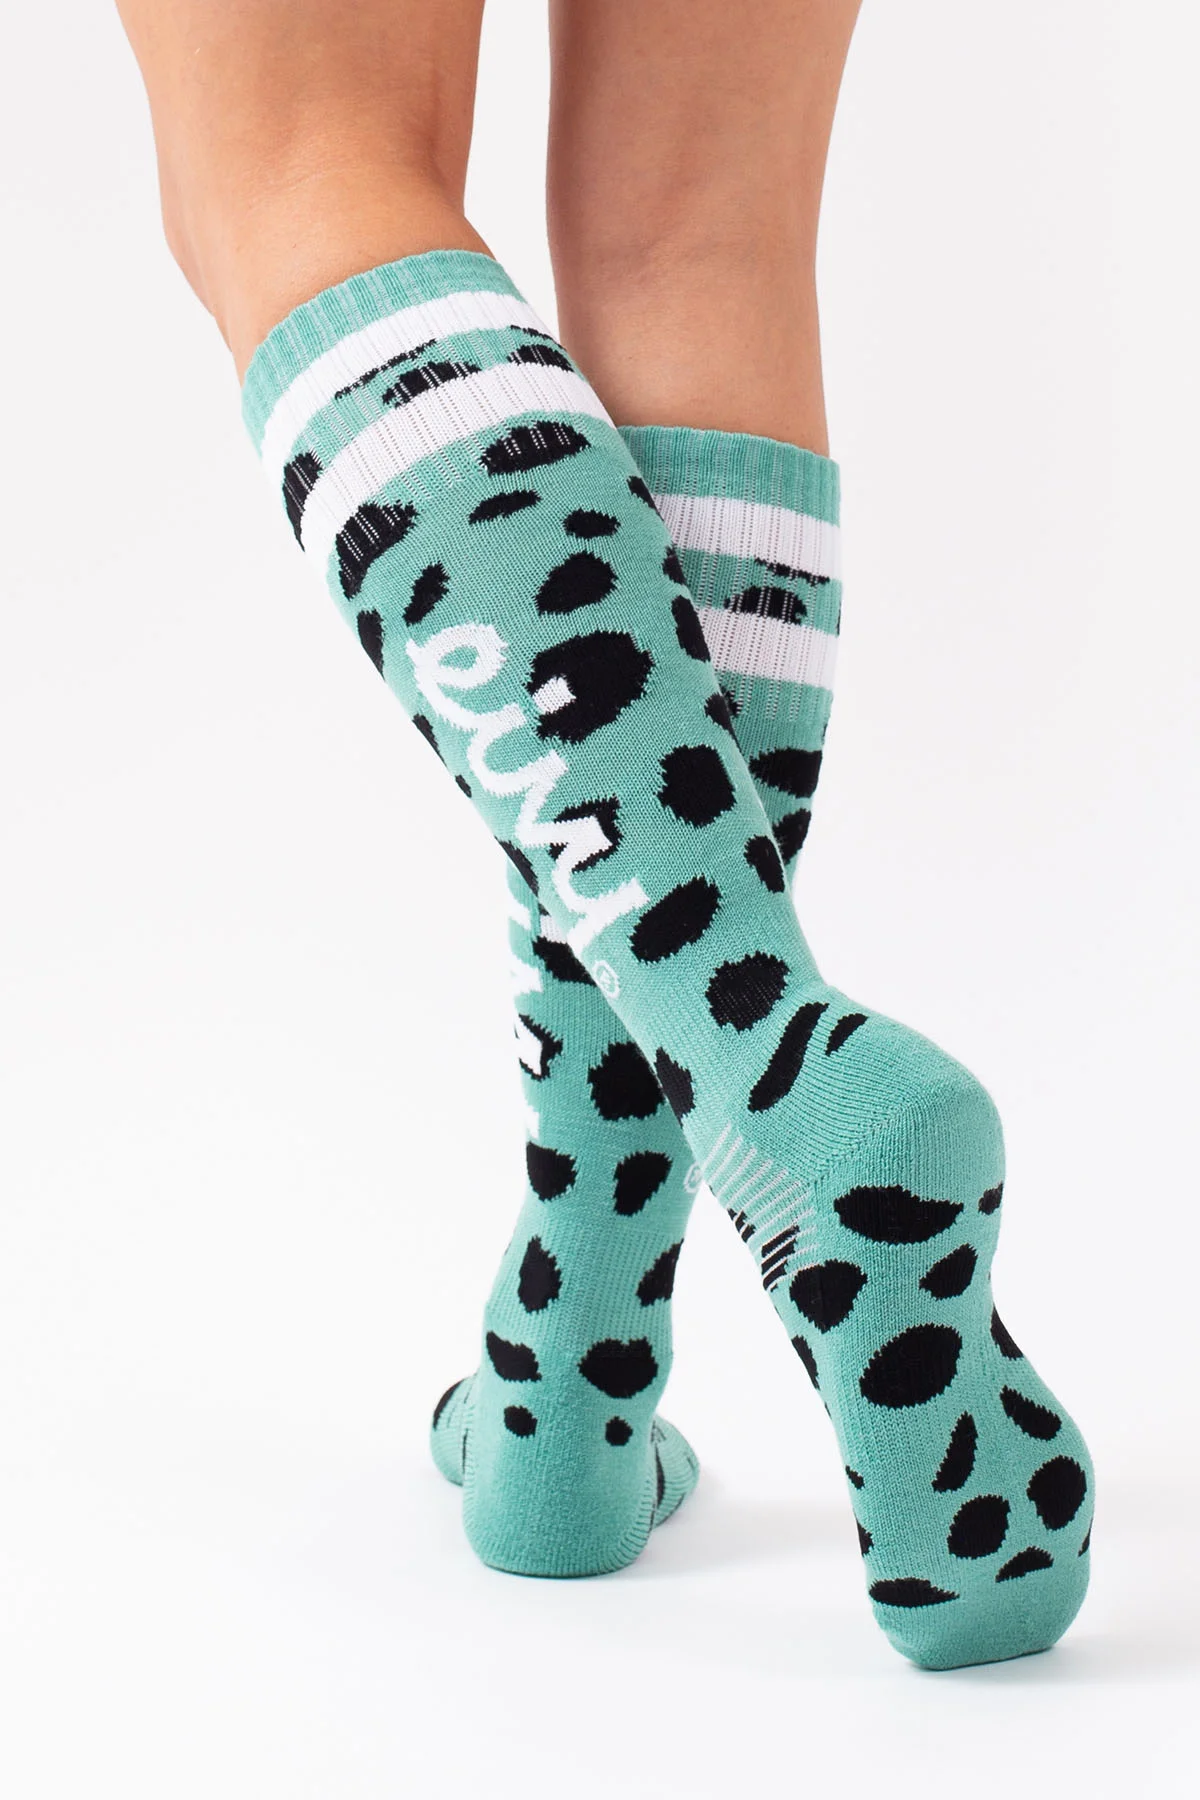 Icecold Tights - Turquoise Cheetah